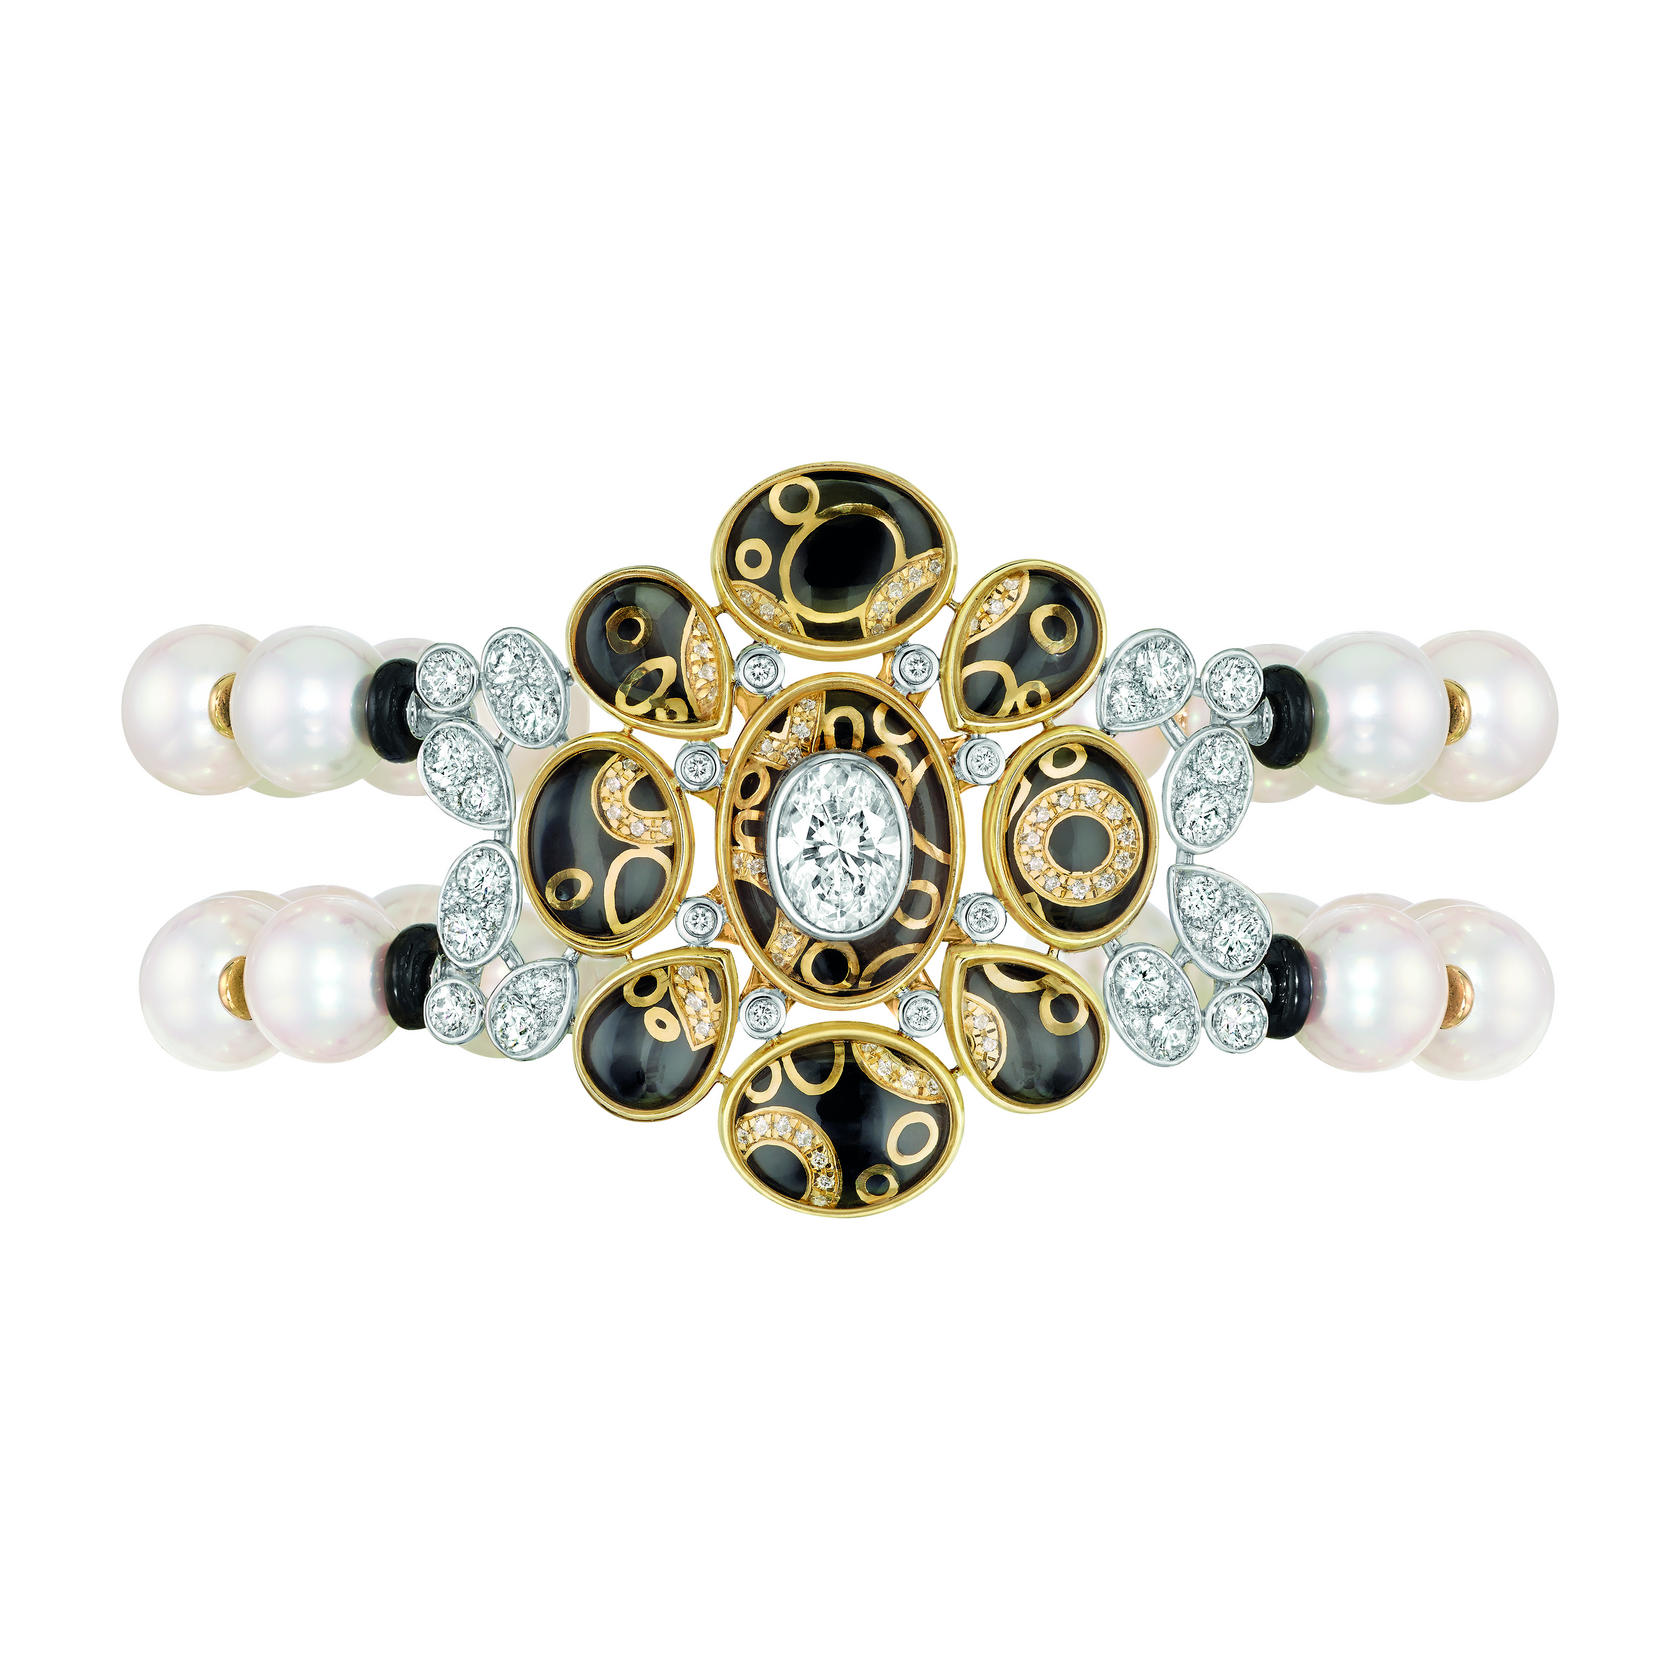 ChanelDress up your look and be mysteriously sexy with the 18ct white and yellow gold bracelet set with diamonds, cultured pearls, rock crystal cabochons and black lacquer. Price on request